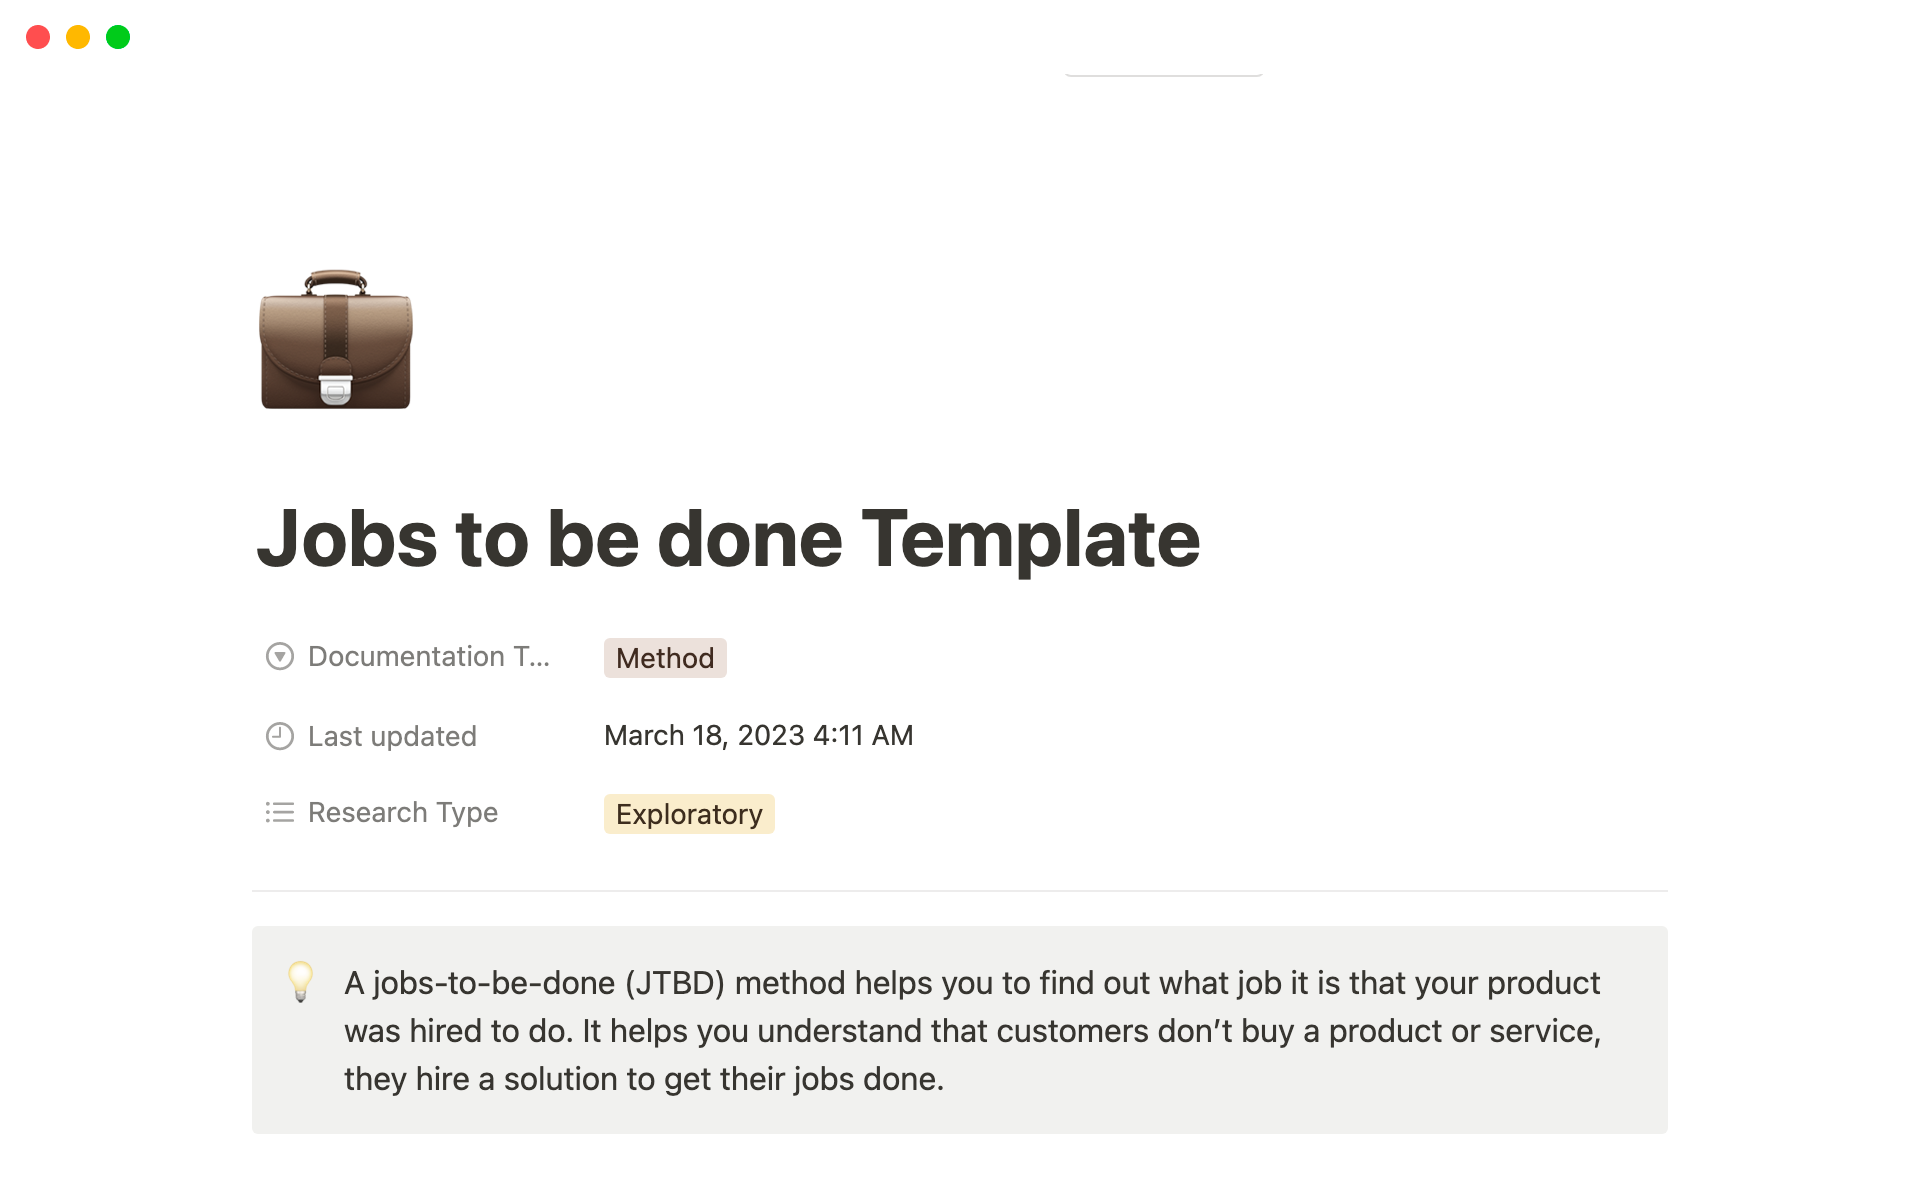 This template helps UX Researchers set up and plan for a jobs-to-be-done method as part of their research project